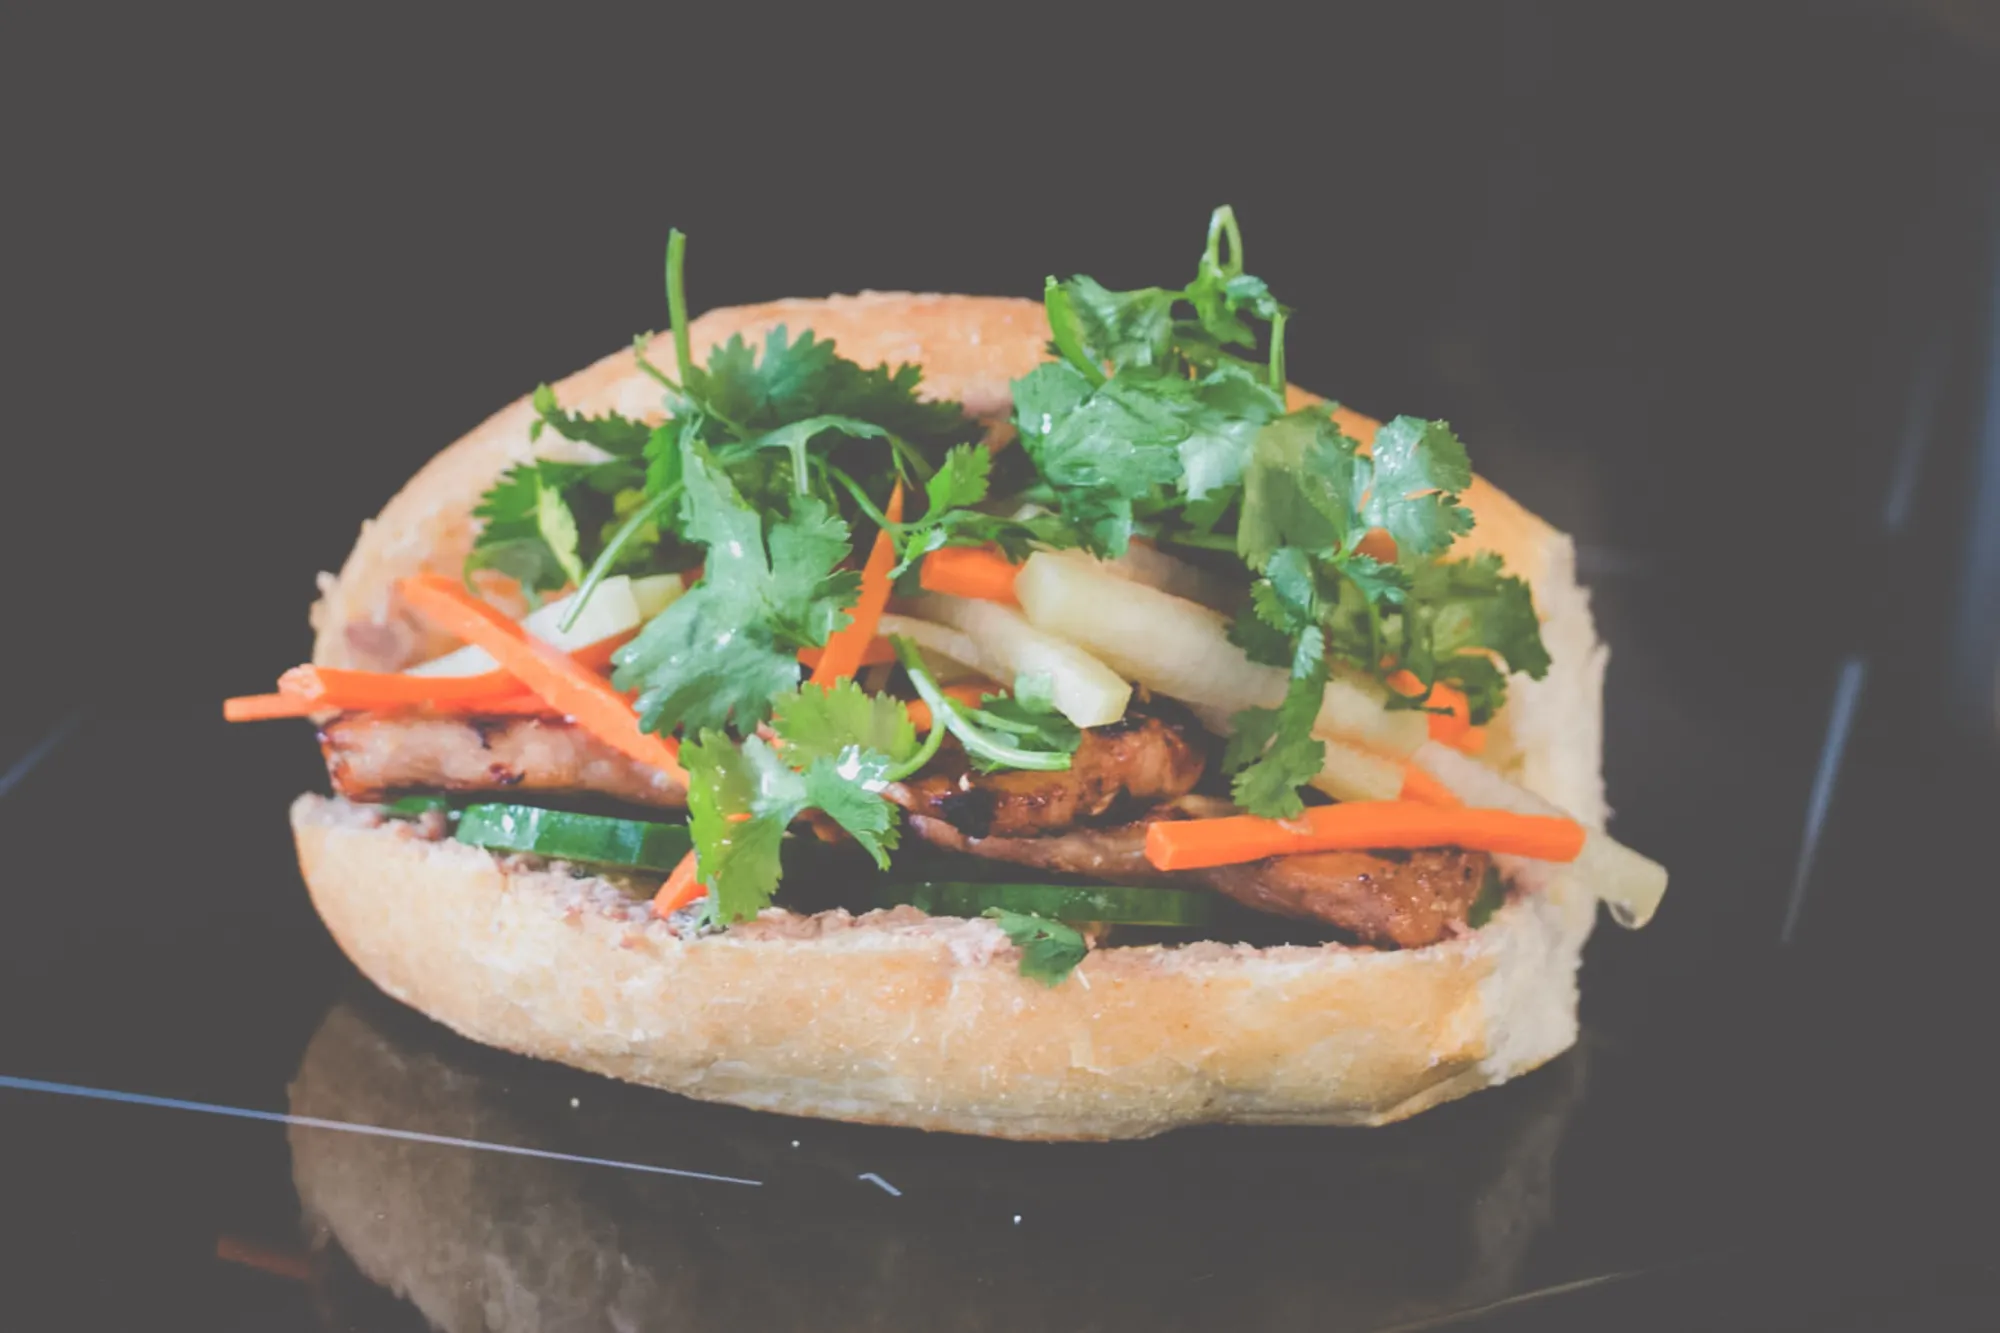 Banh Mi, a Vietnamese sandwich. A bun filled with grilled chicken, cucumber, pickled vegetables and green cilantro.